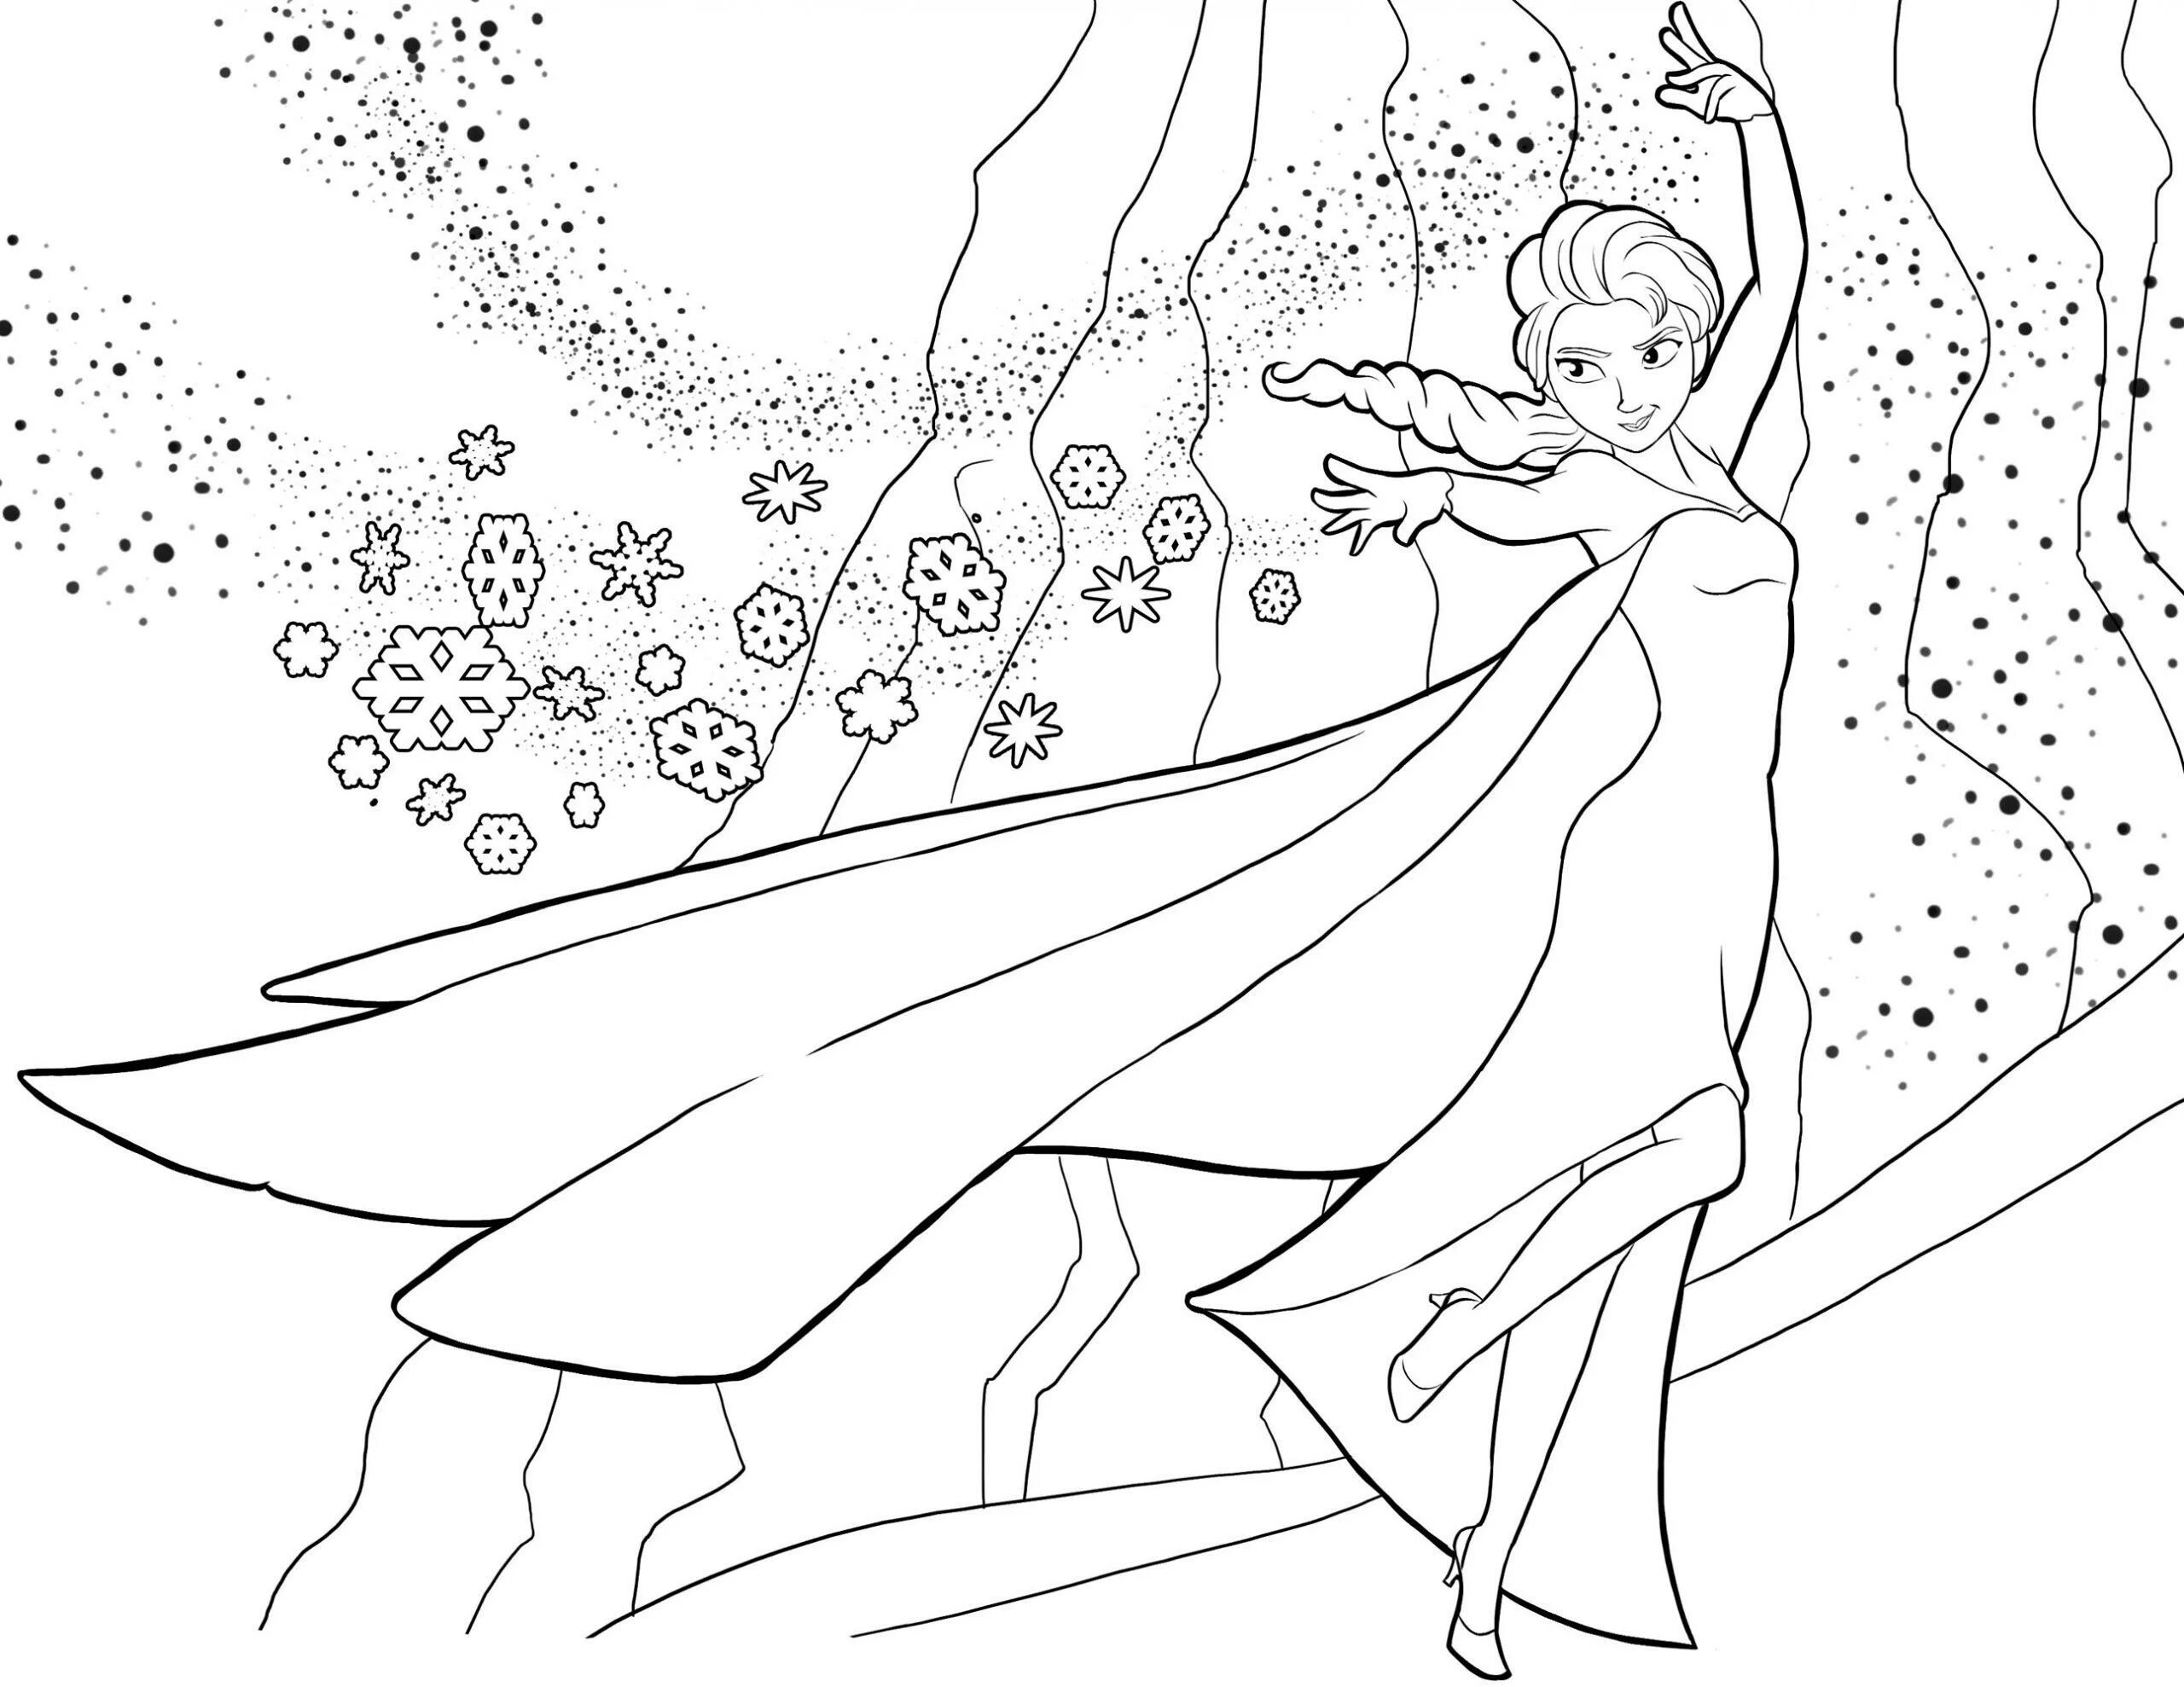 Serendipitous snow queen coloring book for girls